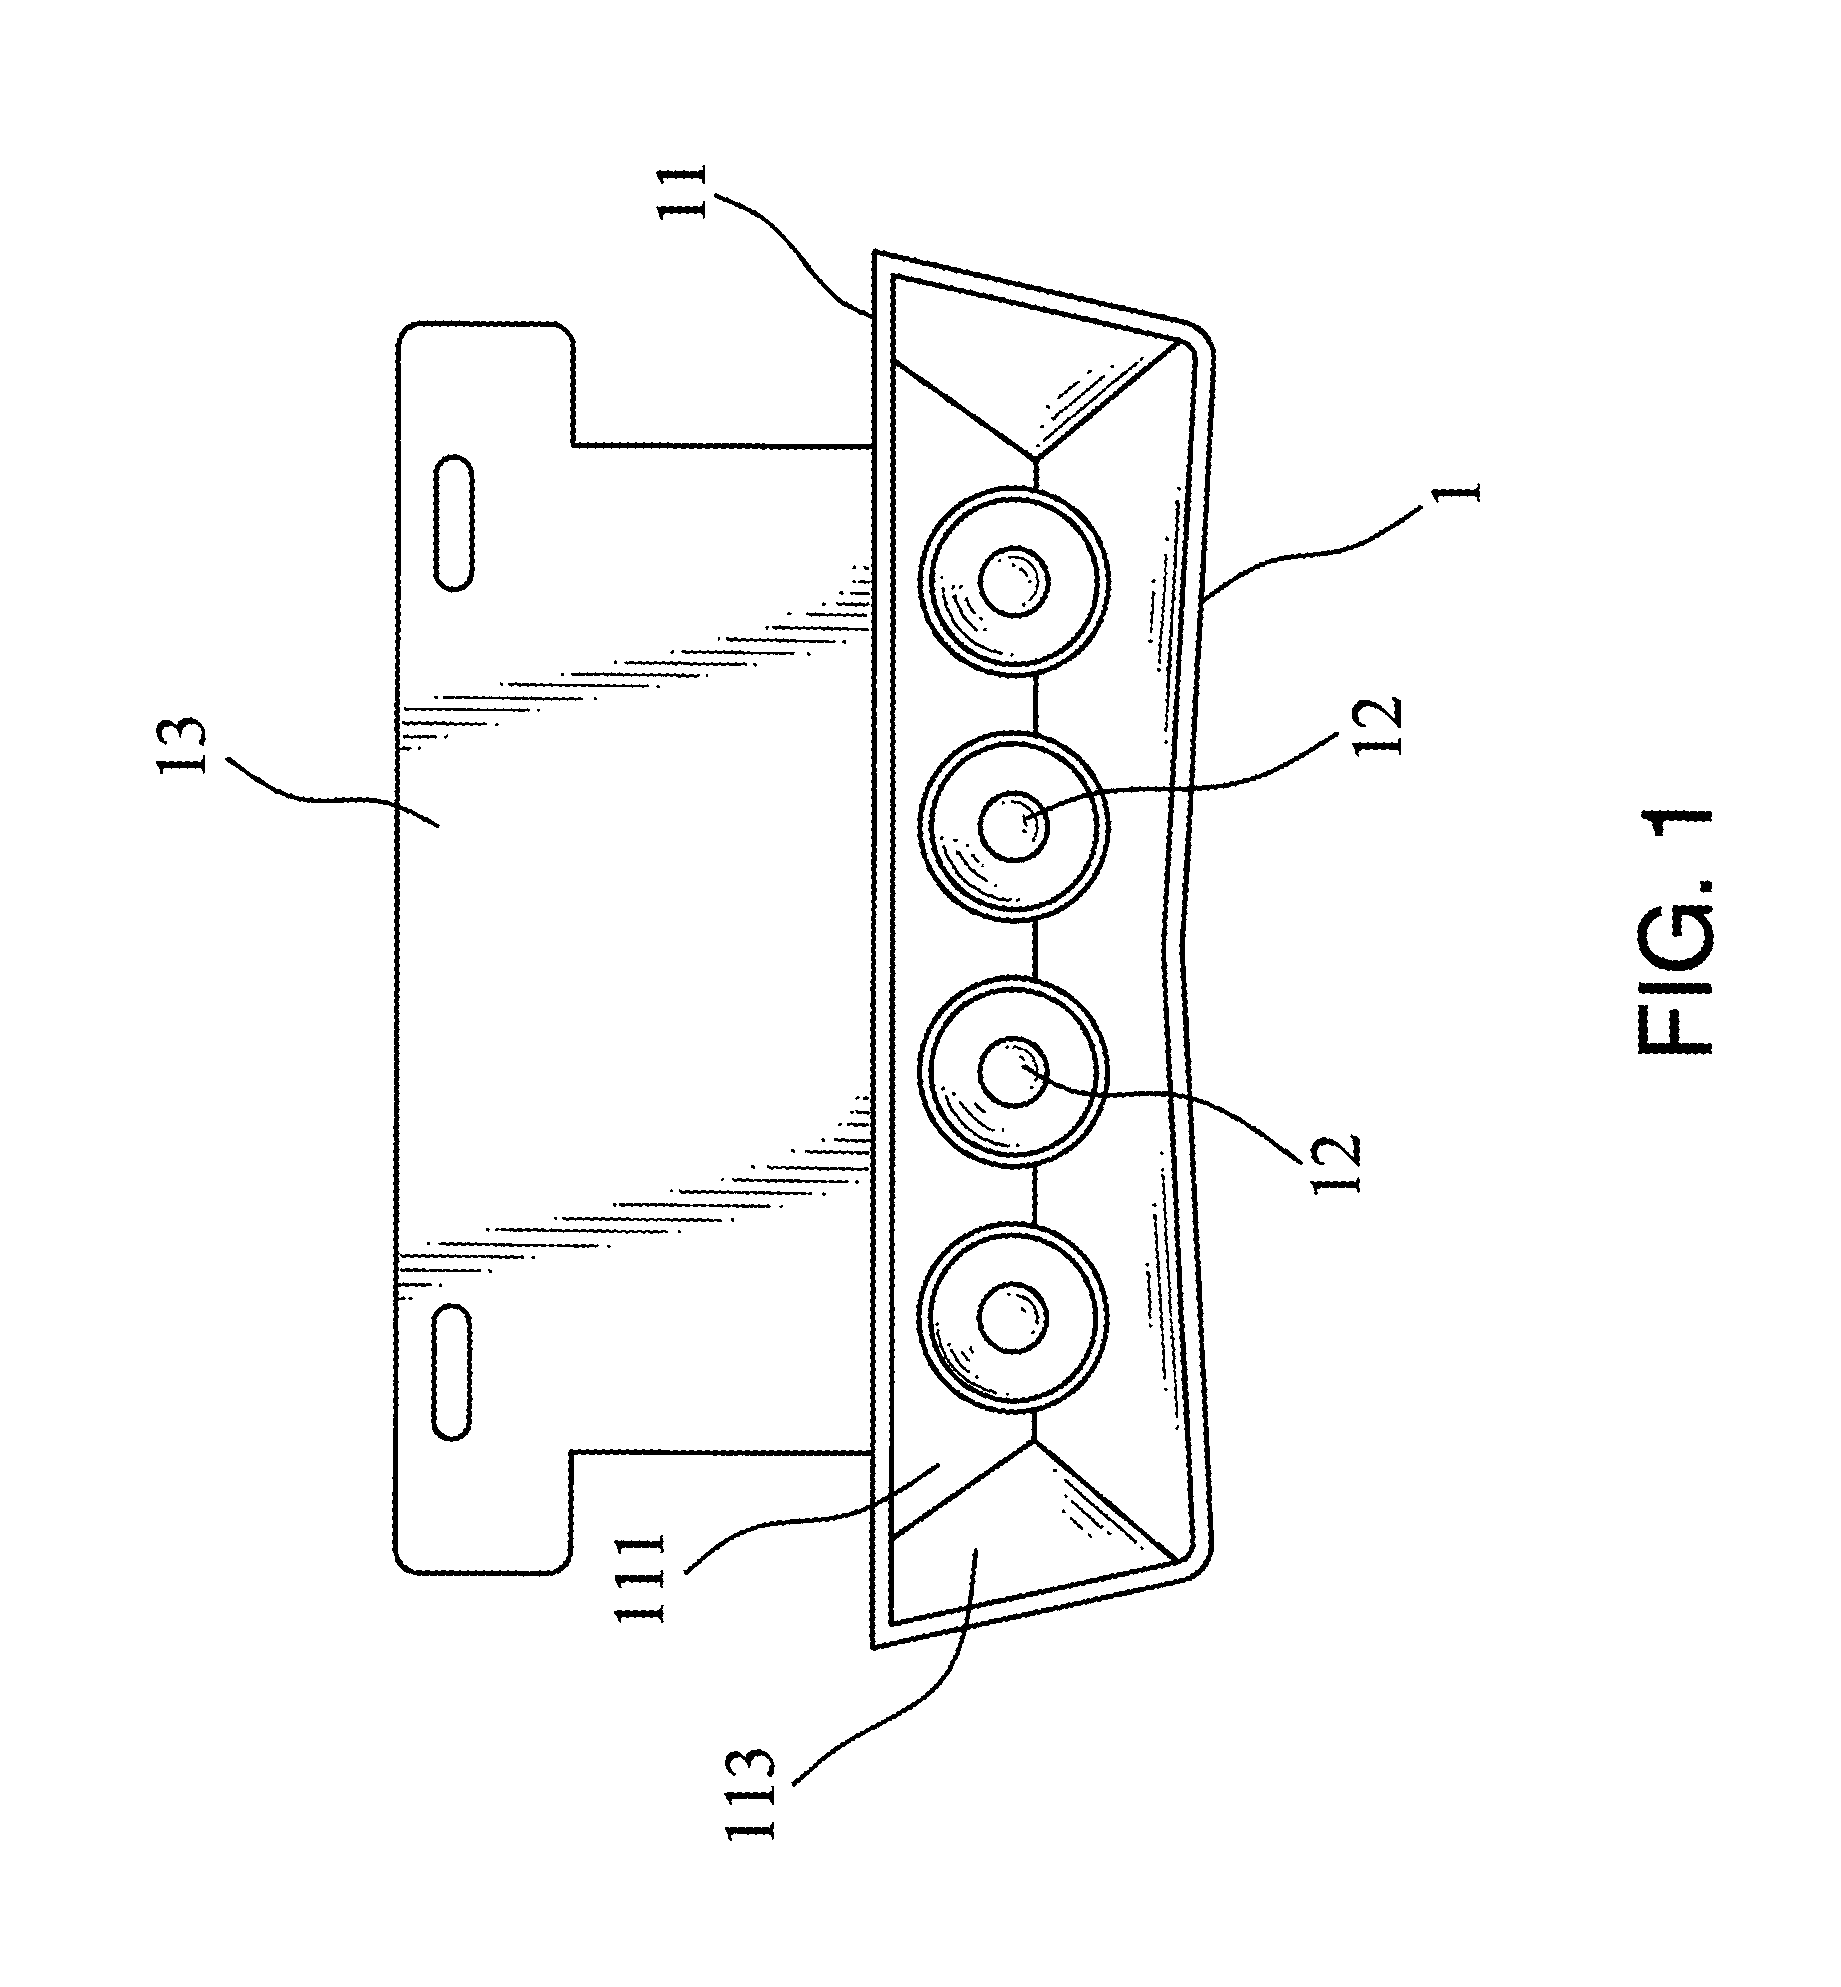 Vehicle infrared projection device